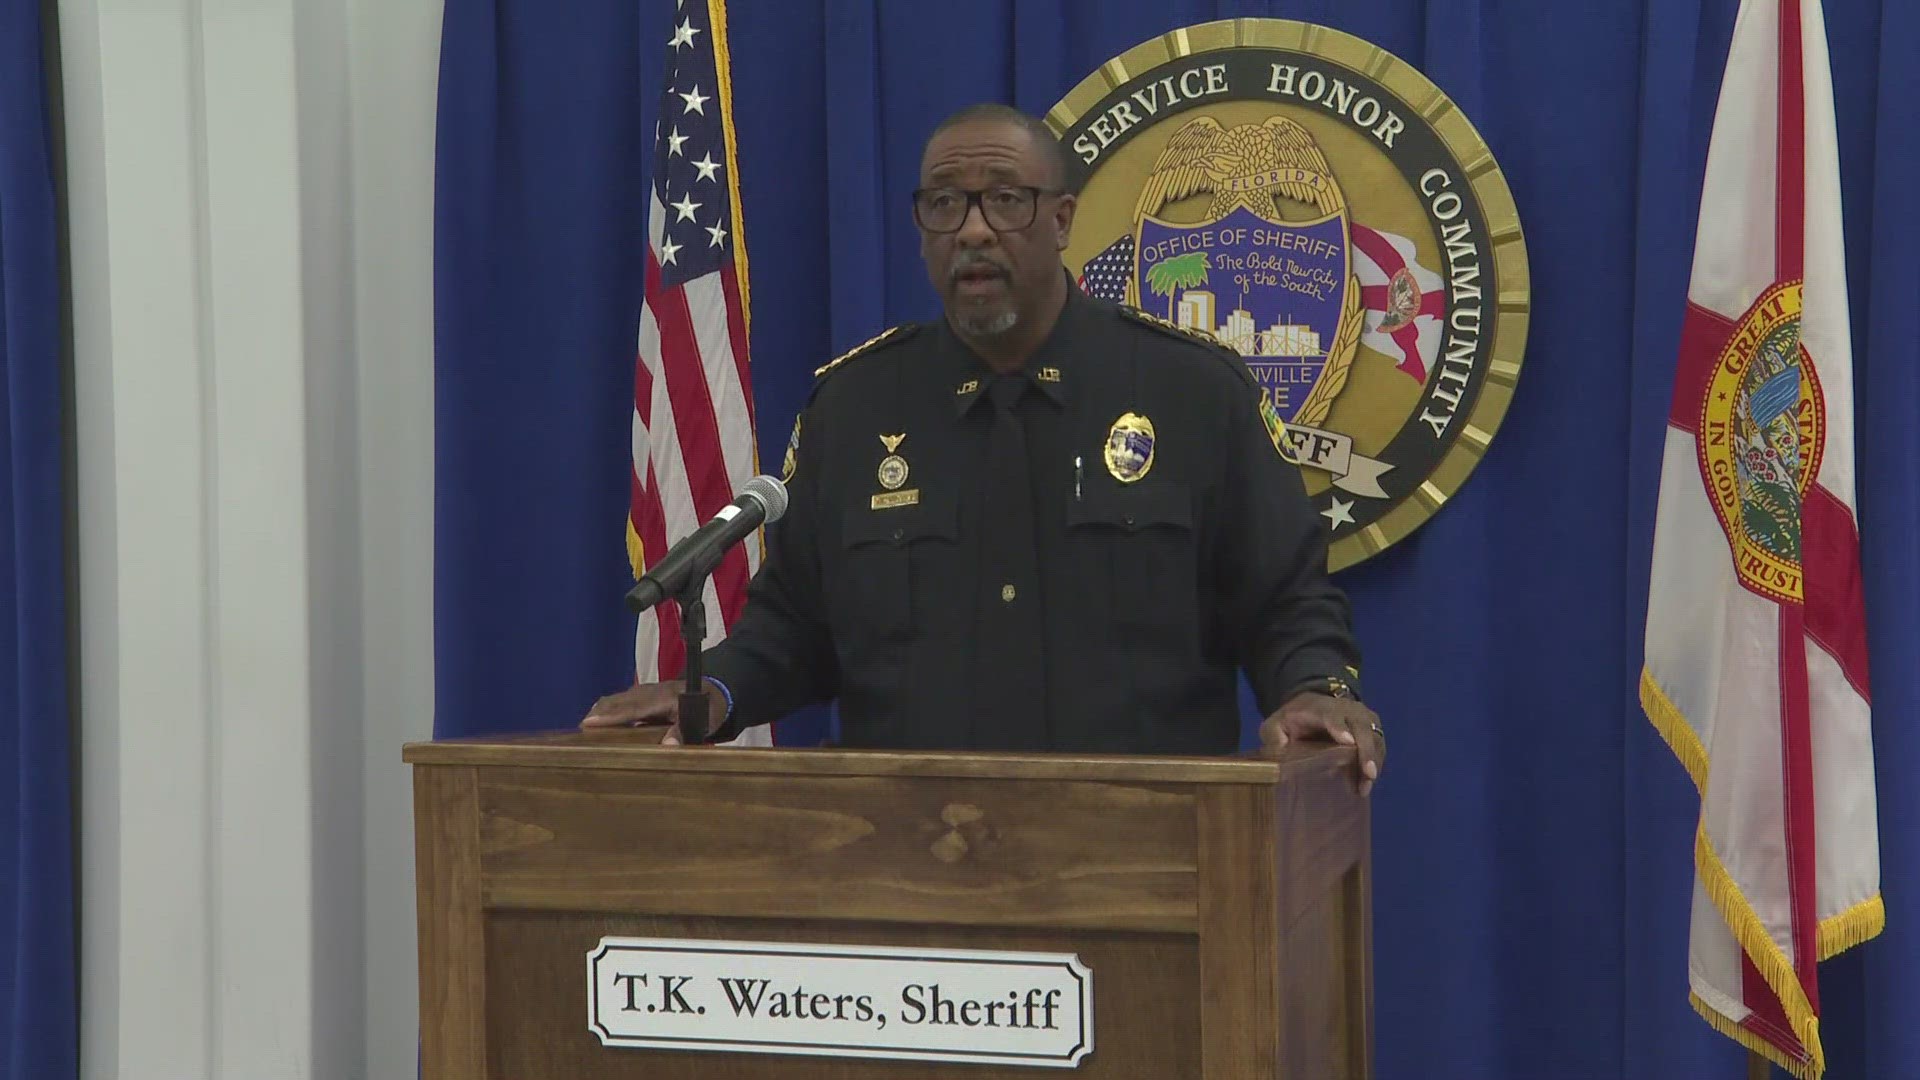 Jacksonville Sheriff T.K. Waters announced during a news conference Tuesday that a JSO officer was arrested and accused of driving under the influence.